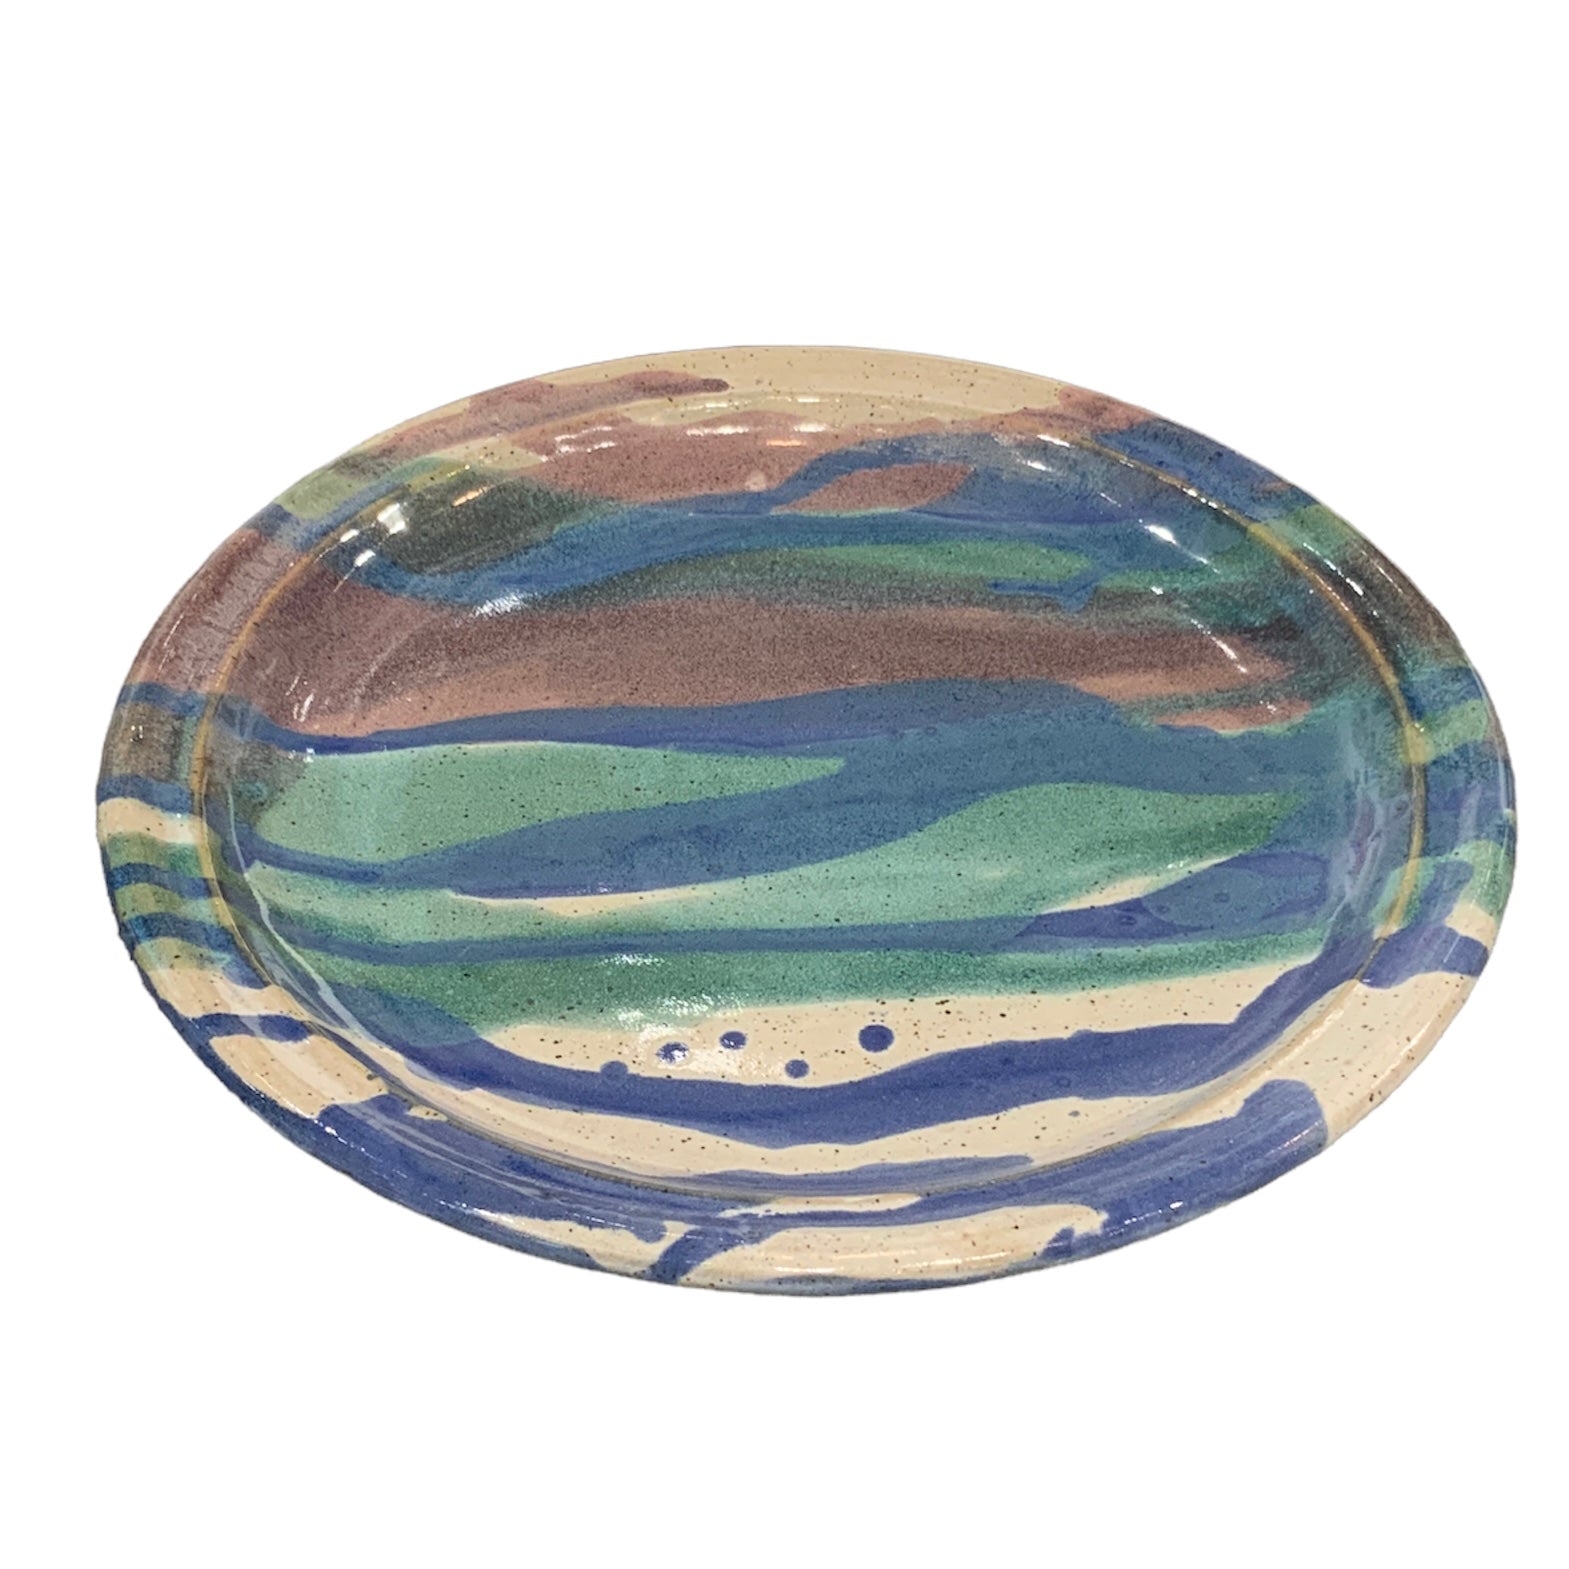 LARGE PLATE - ABSTRACT MULTI-COLOR